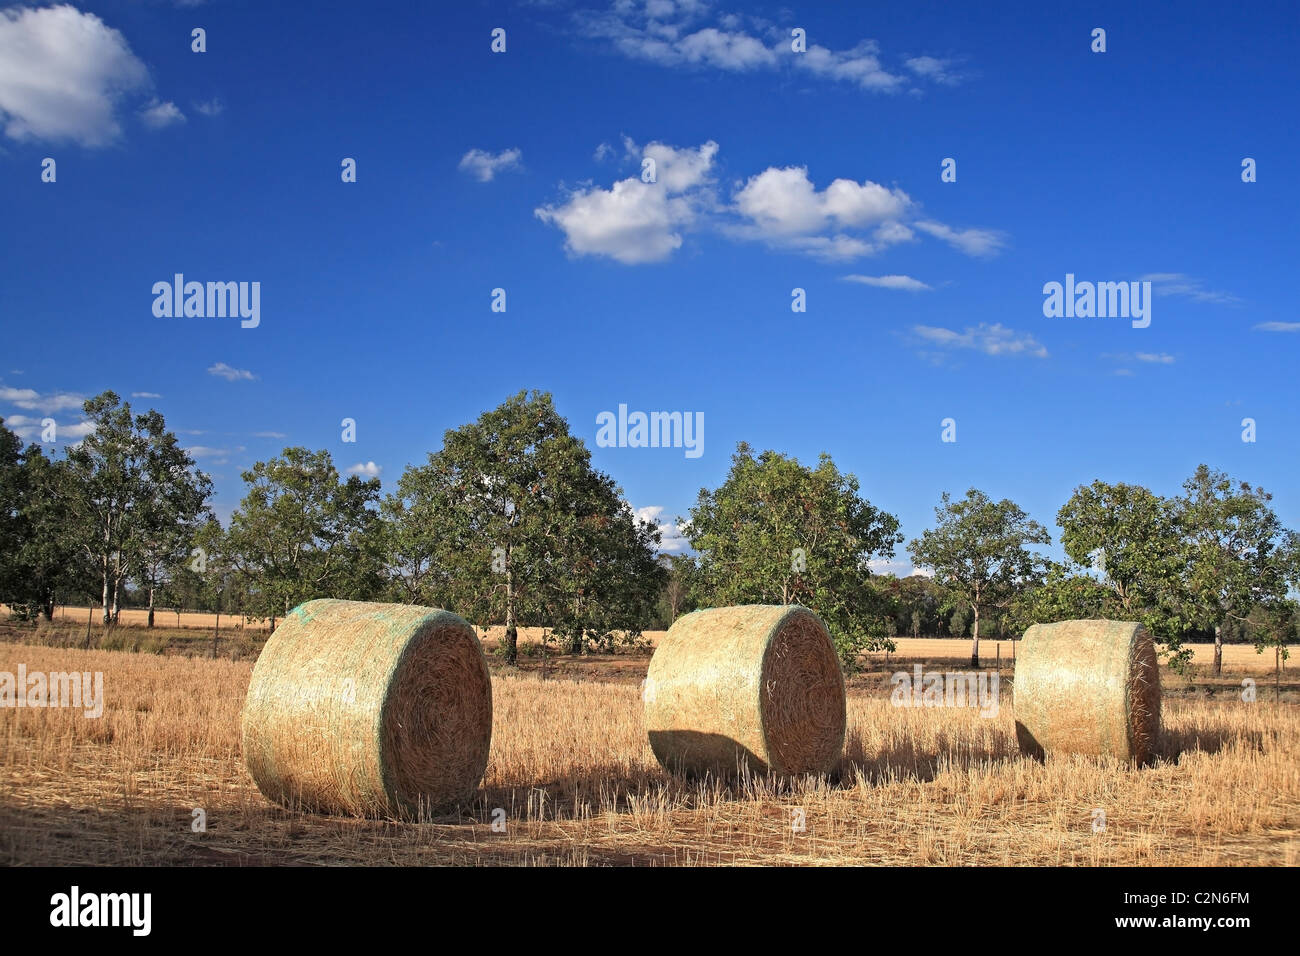 Three haybales in a paddock in outback NSW Australia with gum trees and blue sky. Stock Photo